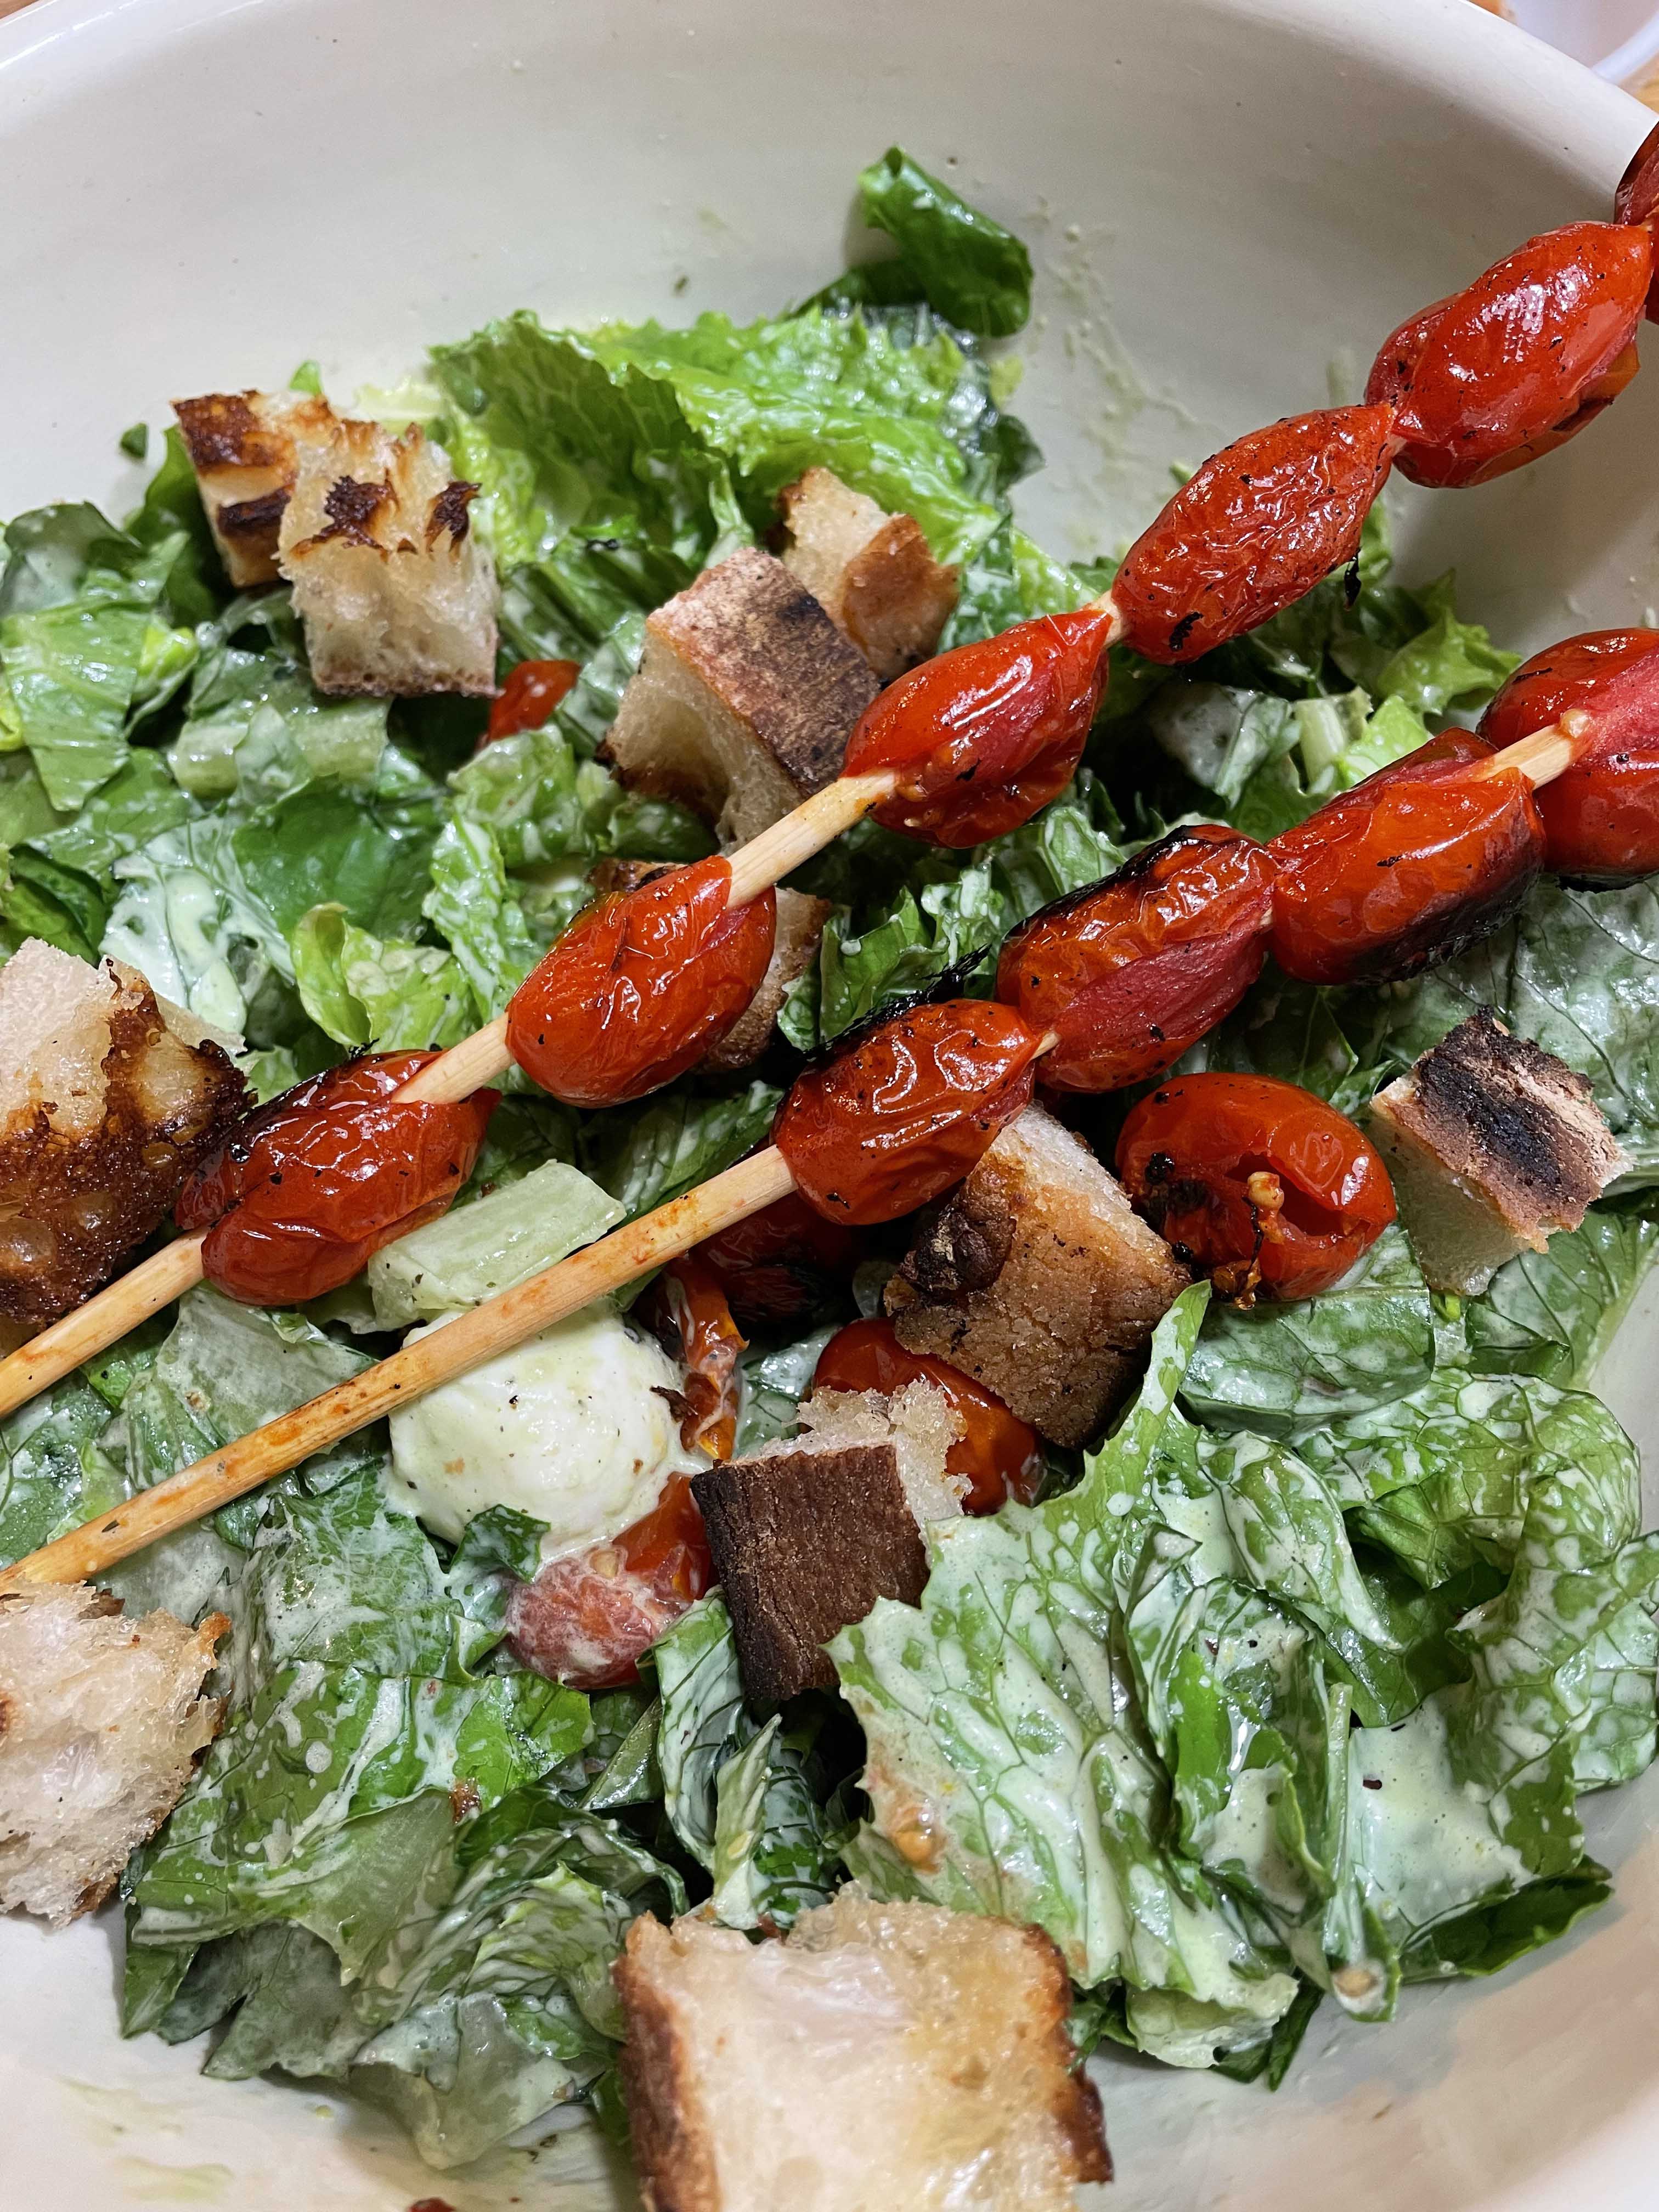 A bowl of salad with tomatoes